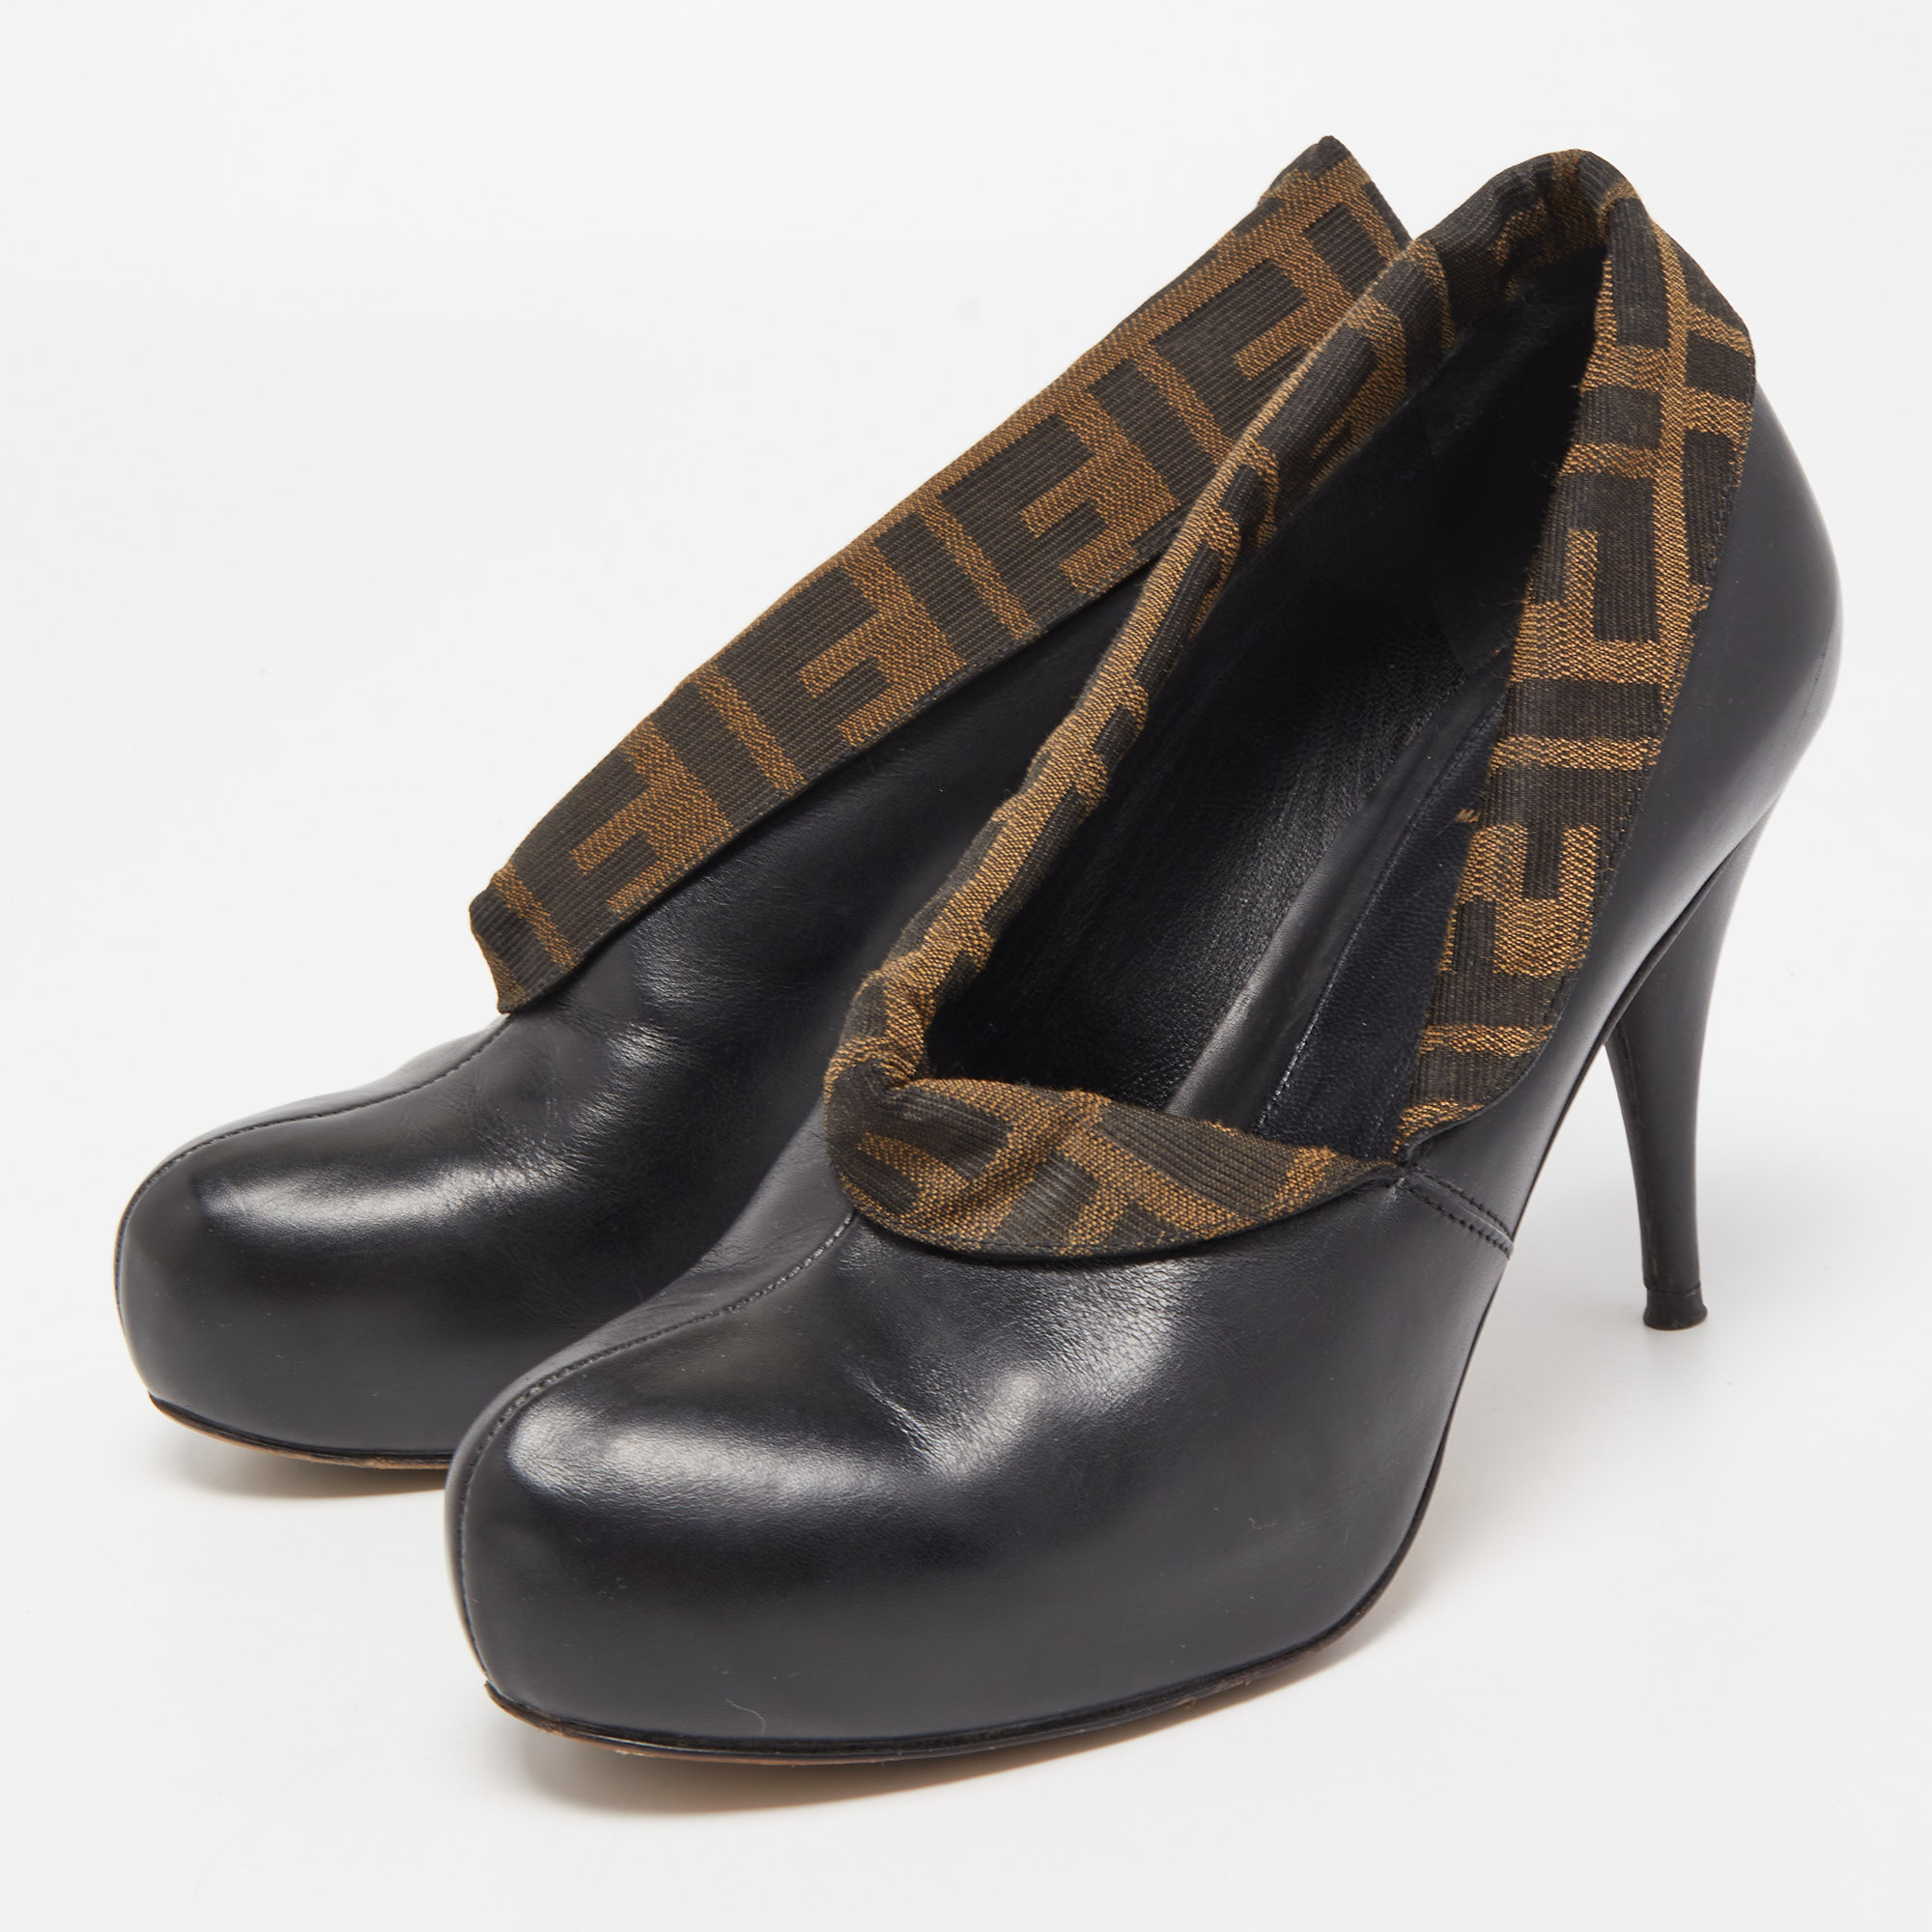 

Fendi Black/Brown Leather and Zucca Canvas Envelope Ankle Booties Size